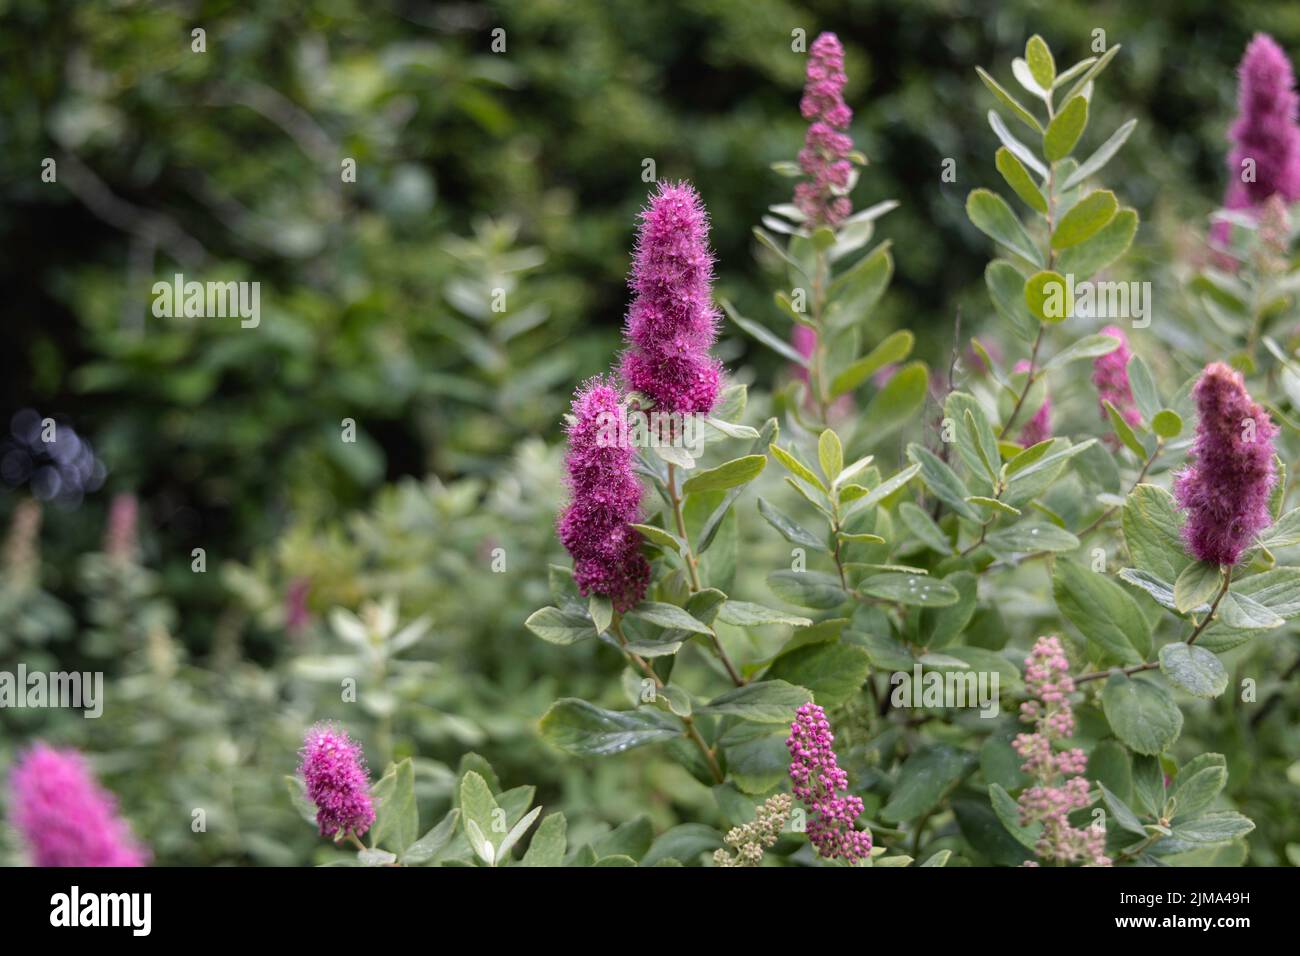 The purple flowers of blossoming spiraea salicifolia in the garden Stock Photo